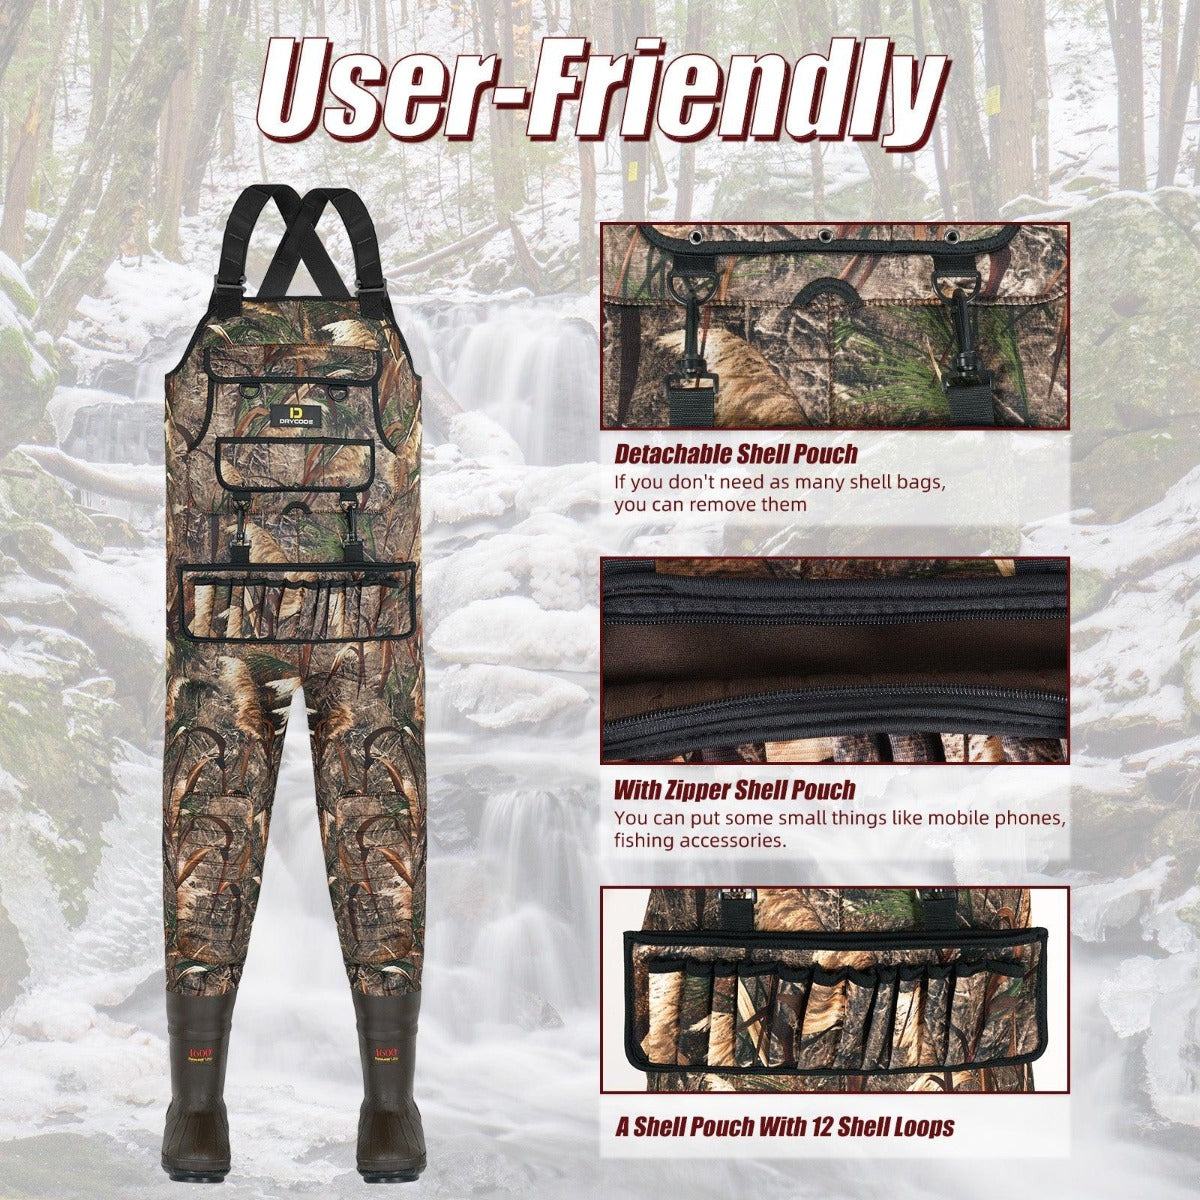 Chest Waders with Boots 1600g Insulated Neoprene Waders for Waterfowl